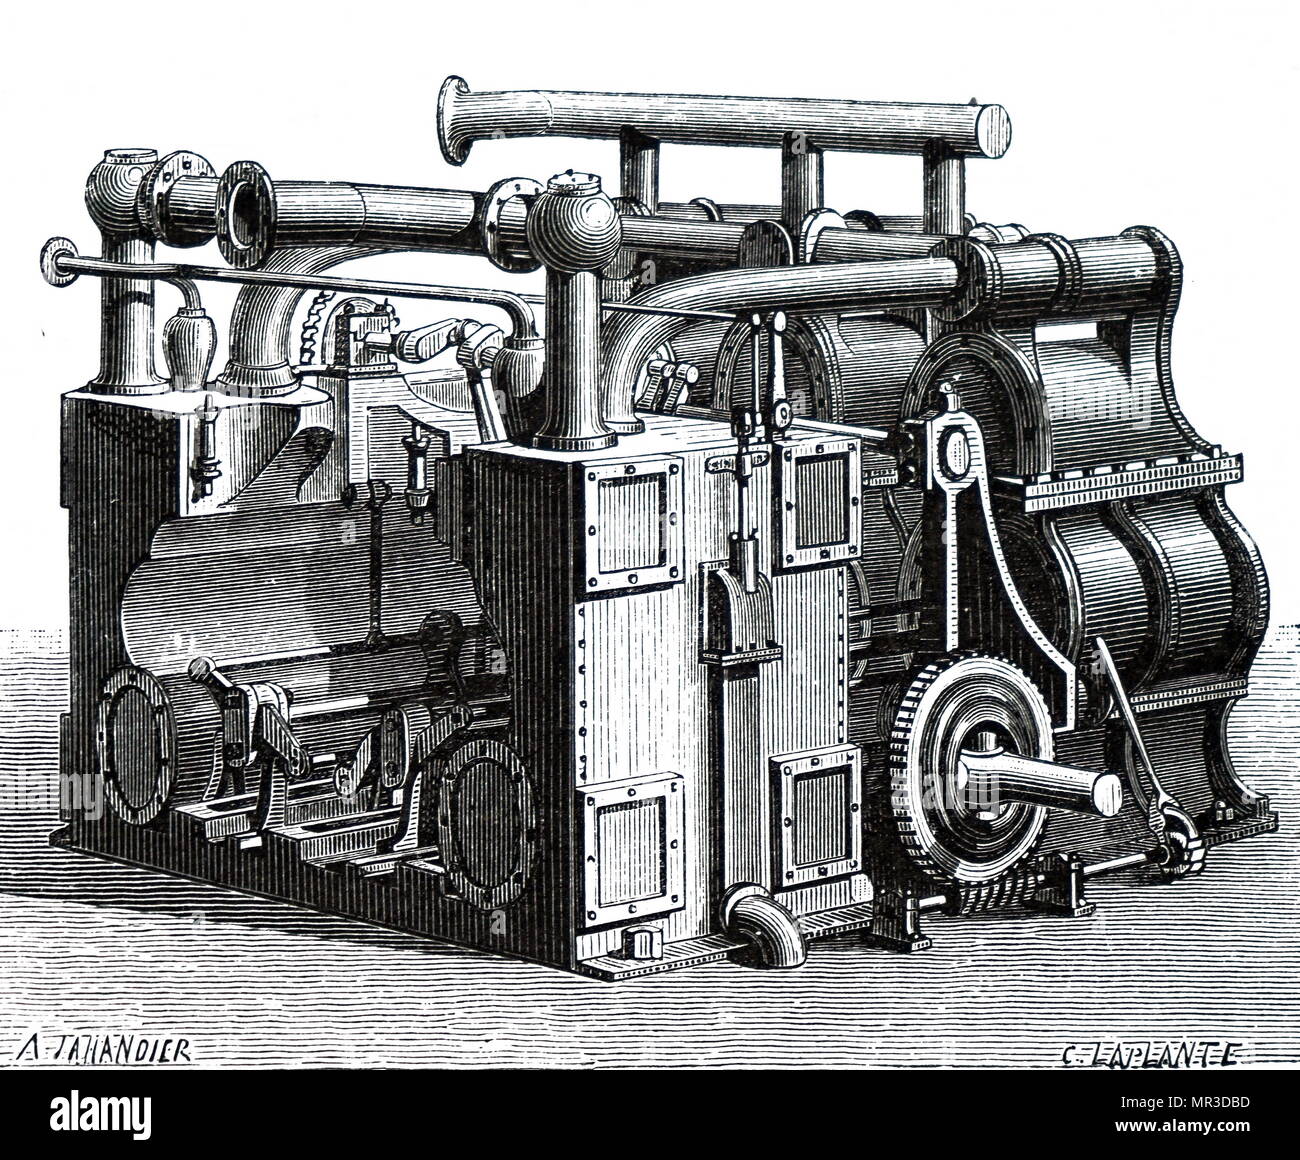 Illustration depicting a compound steam engine of the French screw-driven armour-plated frigate 'Friedland'. These engines could maintain the ship at a speed of 14½ knots in cold weather, and consumed 5 tons of coal per hour. Dated 19th century Stock Photo